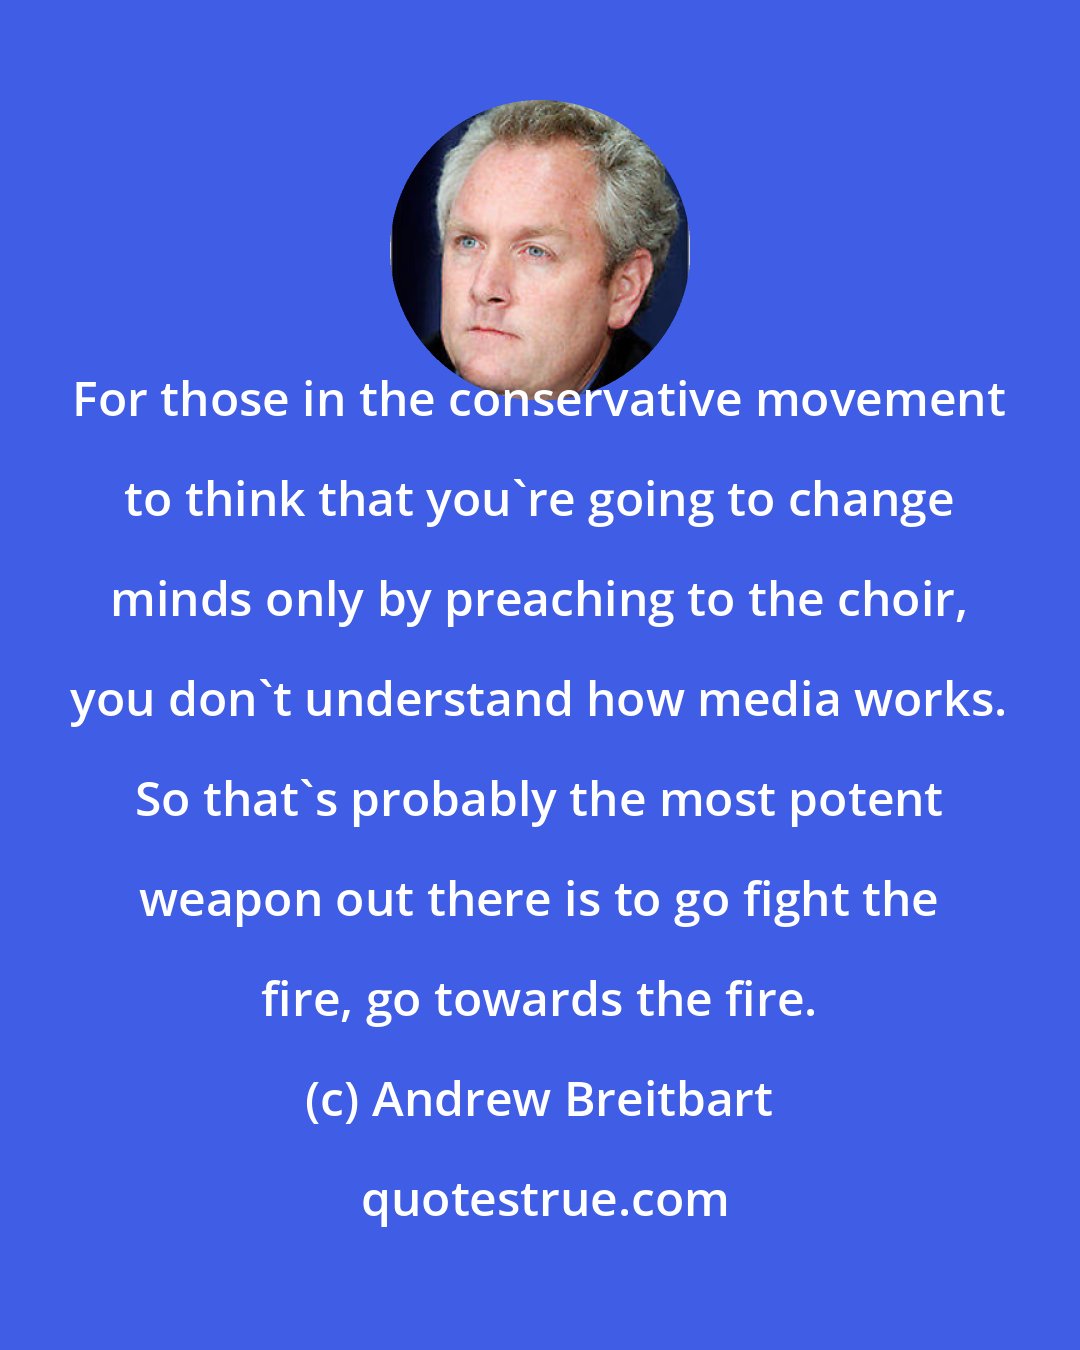 Andrew Breitbart: For those in the conservative movement to think that you're going to change minds only by preaching to the choir, you don't understand how media works. So that's probably the most potent weapon out there is to go fight the fire, go towards the fire.